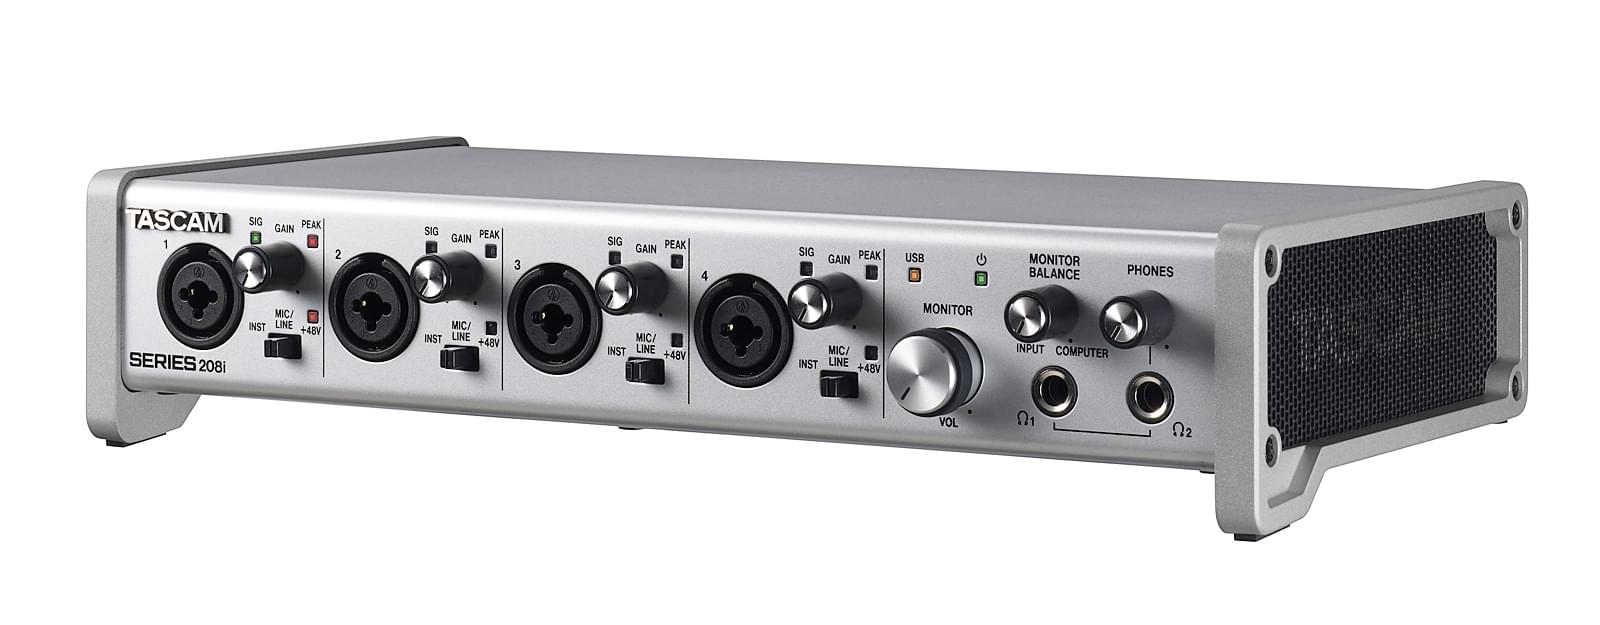 Right angle view | Tascam SERIES 208i